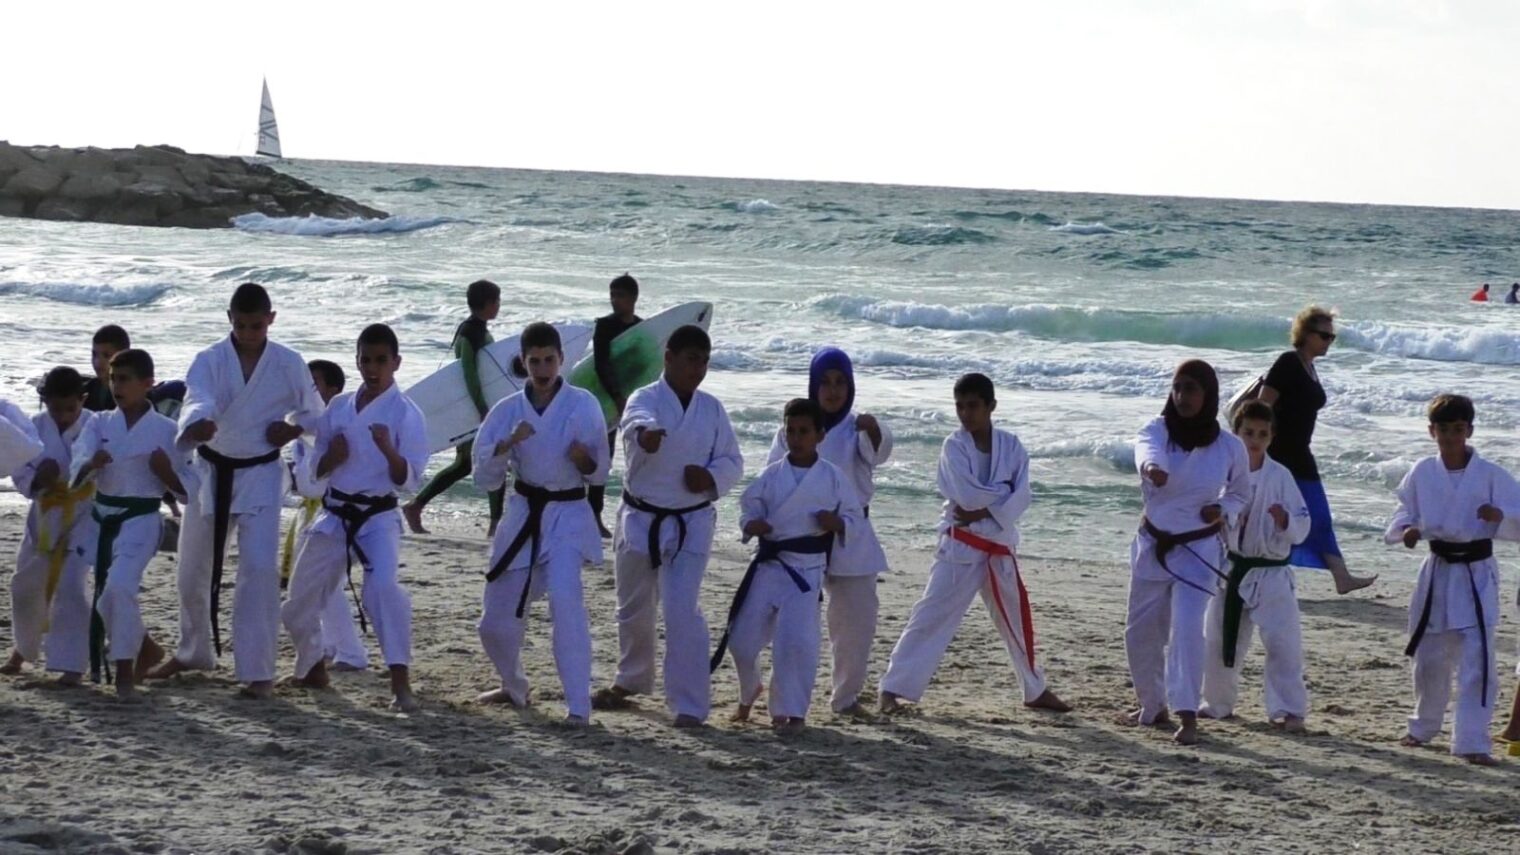 About 100 Jewish and Arab Budo for Peace participants gave a public demo at the second annual International Martial Arts Friendship Training in May 2016. Photo courtesy of Budo for Peace